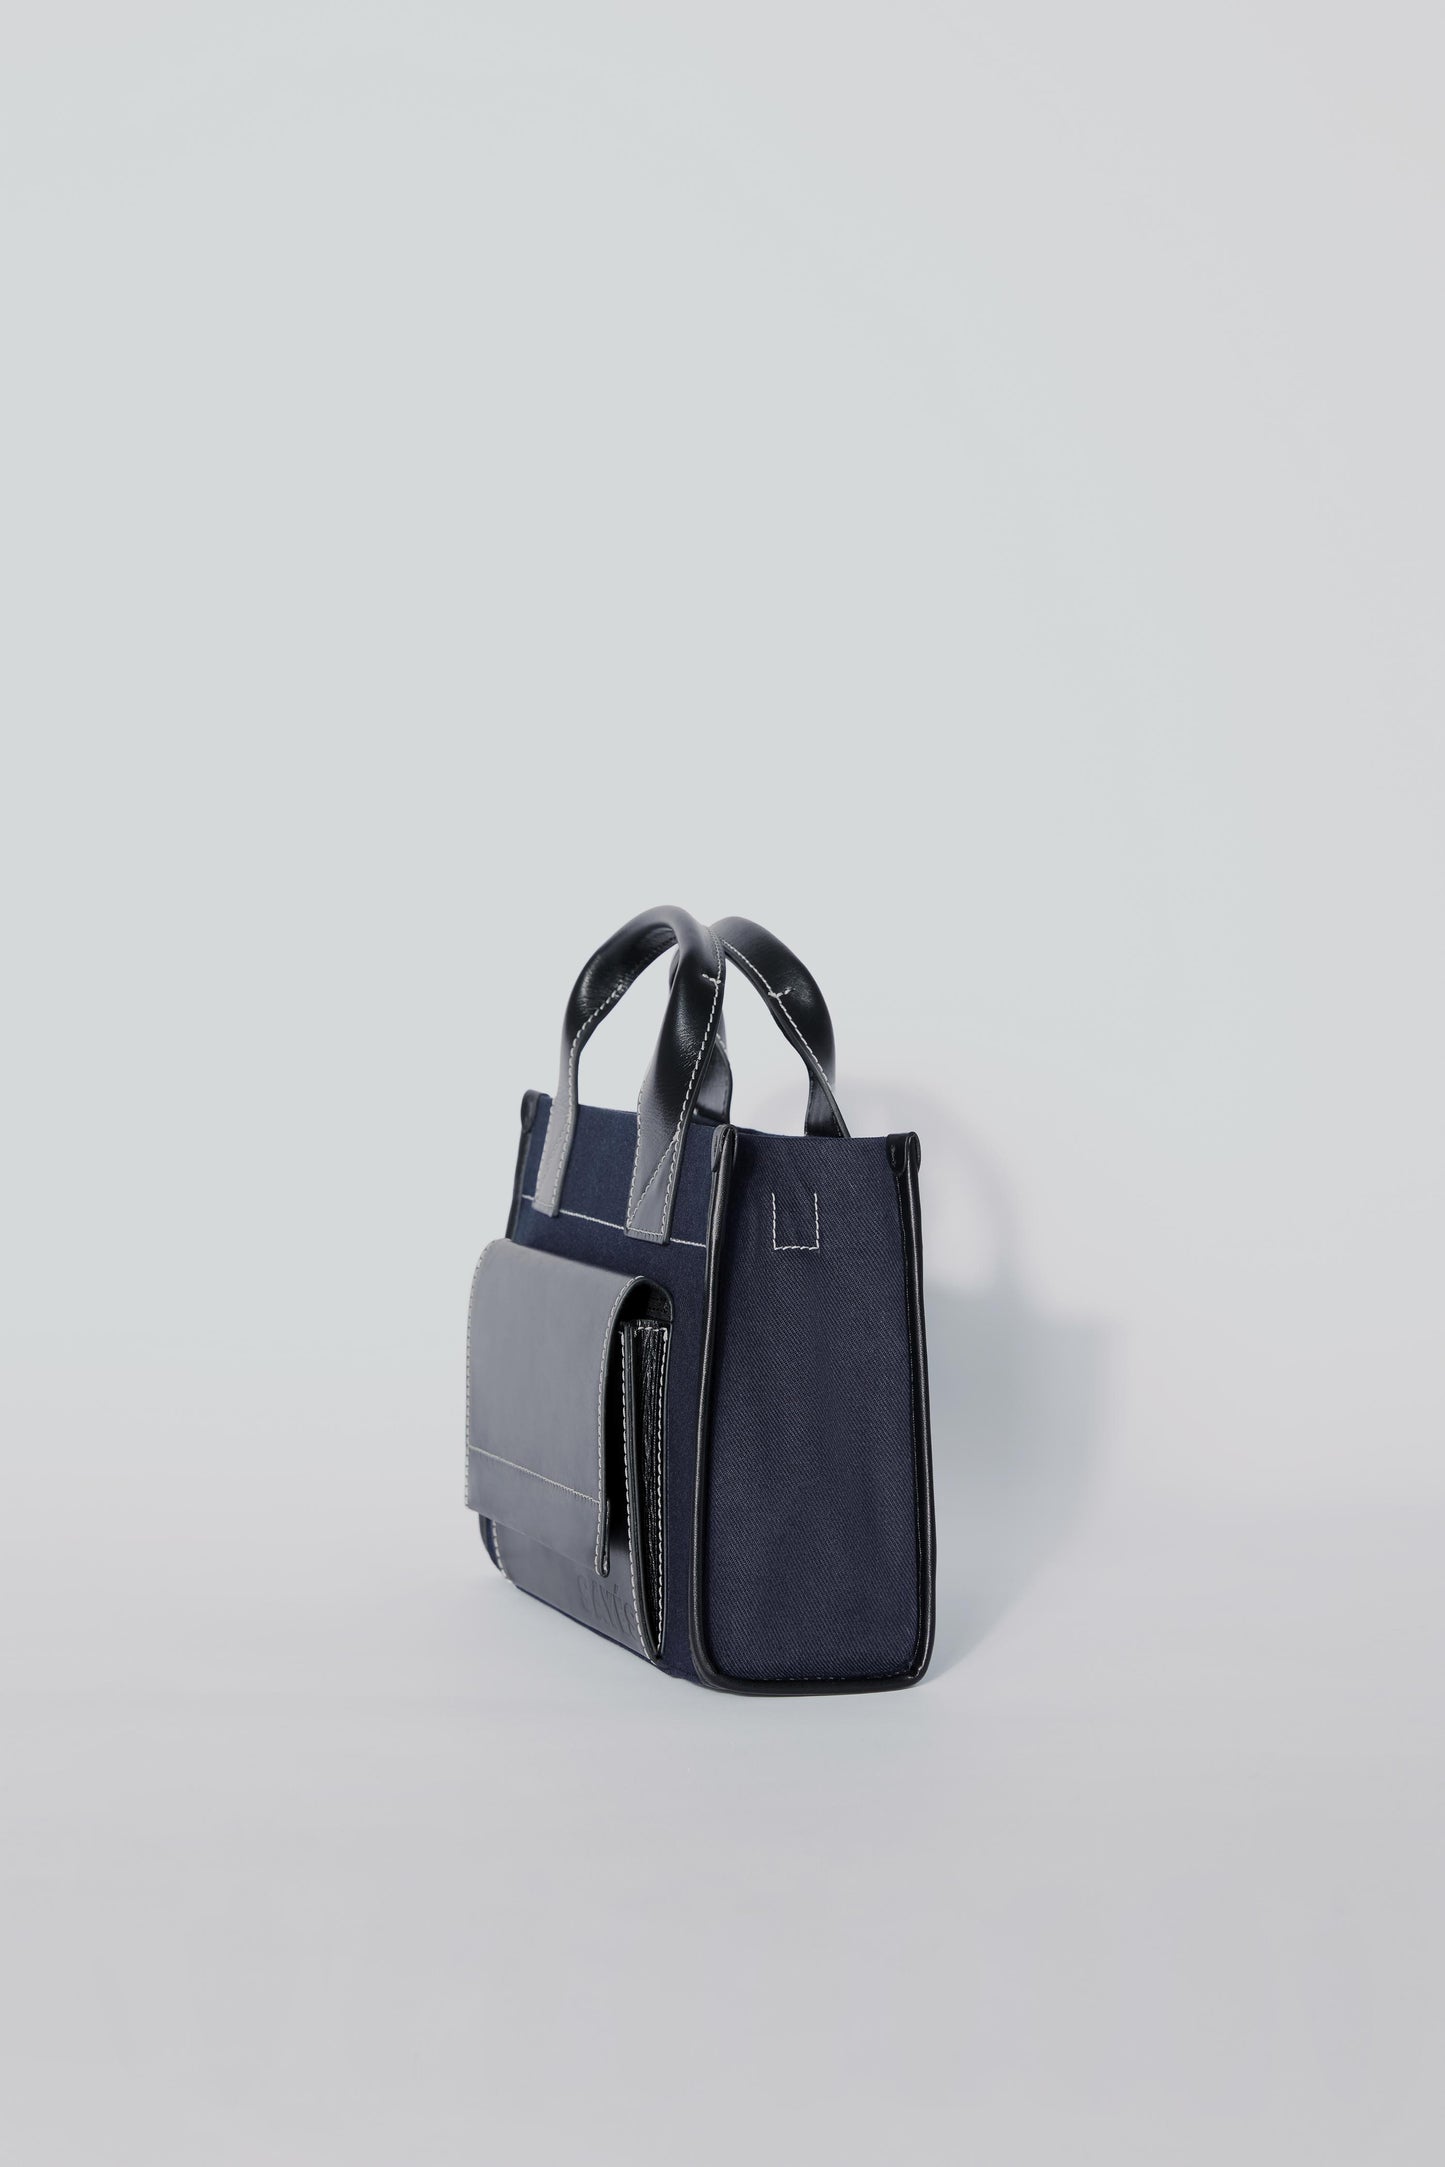 STITCHED POCKET MINI TOTE BAG IN NAVY AND BLACK